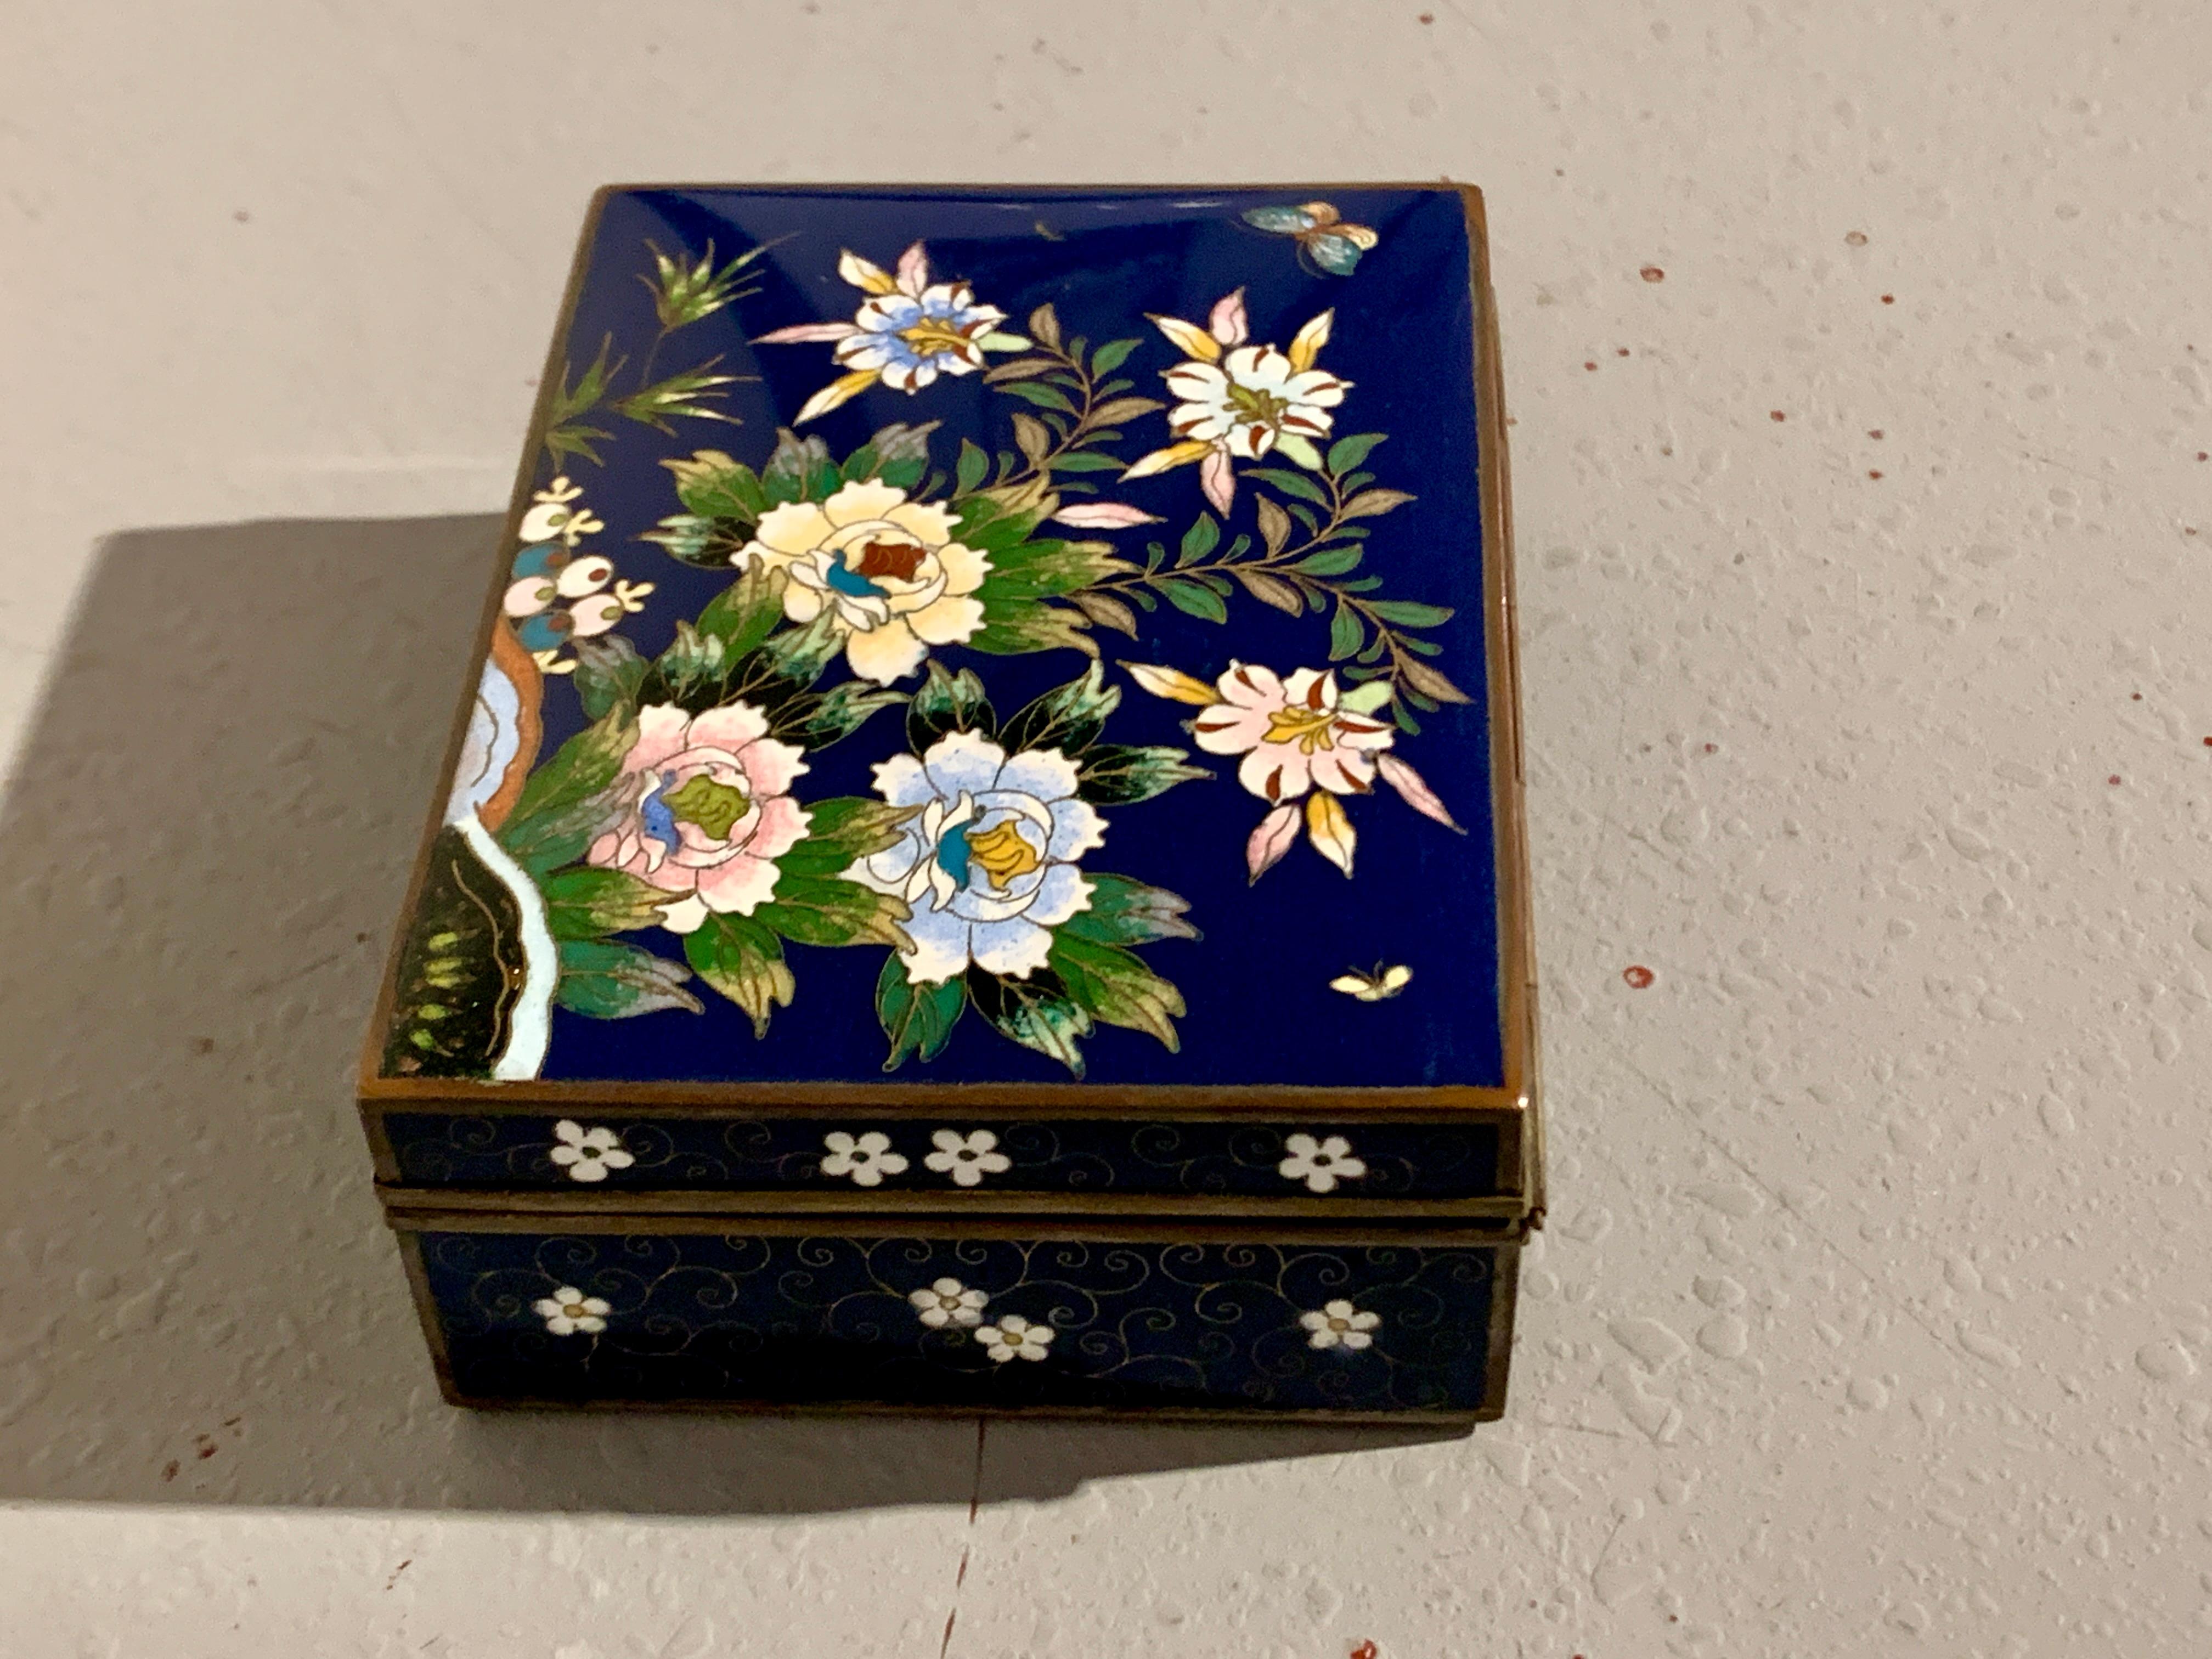 A beautifully decorated deep blue cloisonne hinged top box, Meiji period, circa 1910, Japan.

The trinket or jewelry box featuring a slightly domed lid decorated with a bold design of blossoming peony and lily in muted shades of pink, blue and